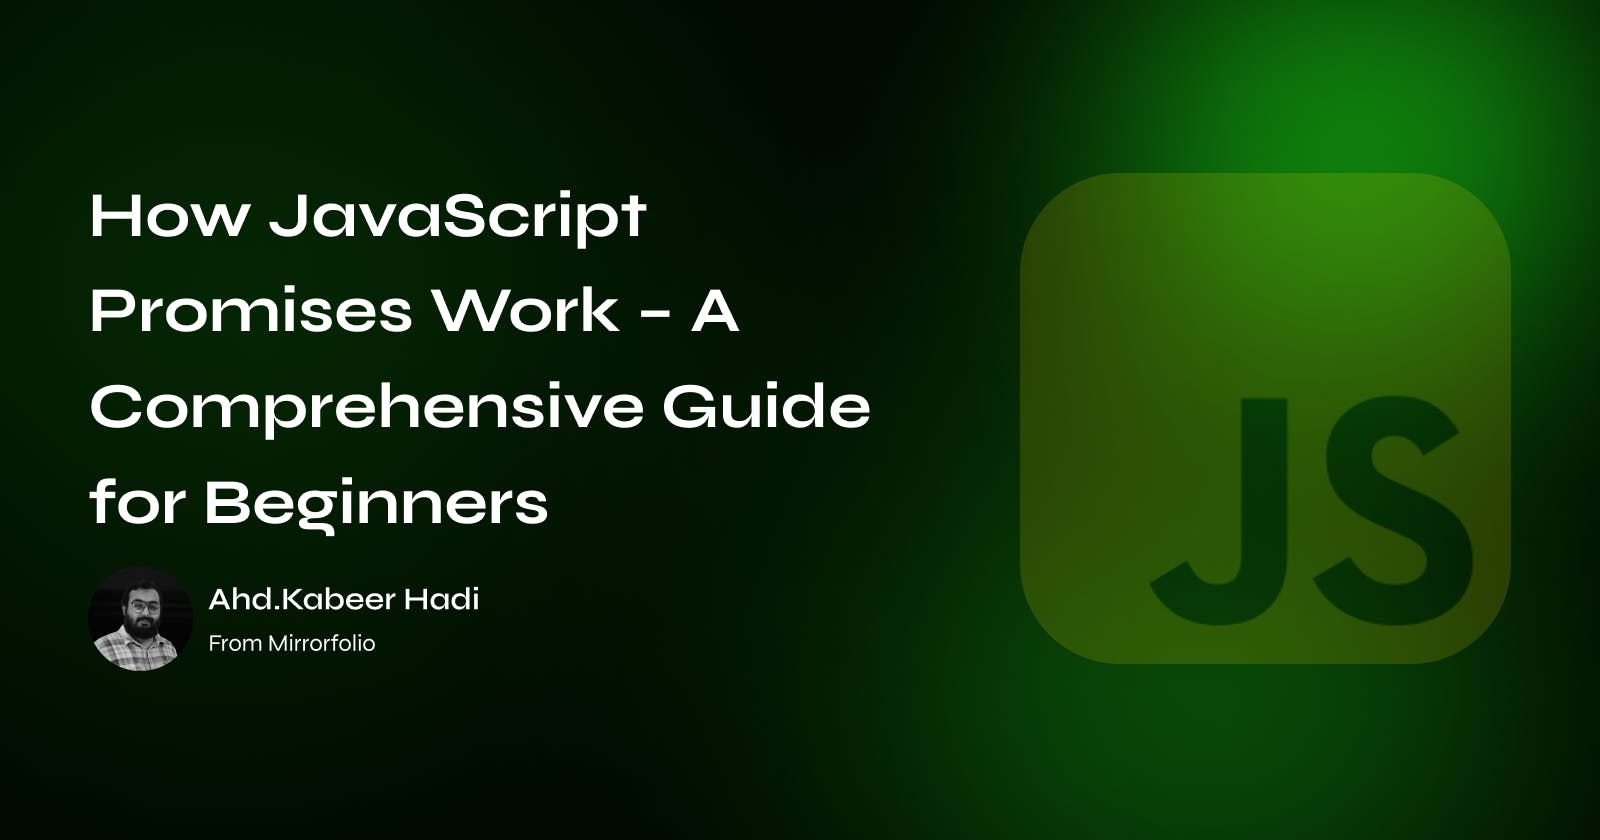 How JavaScript Promises Work – A Comprehensive Guide for Beginners